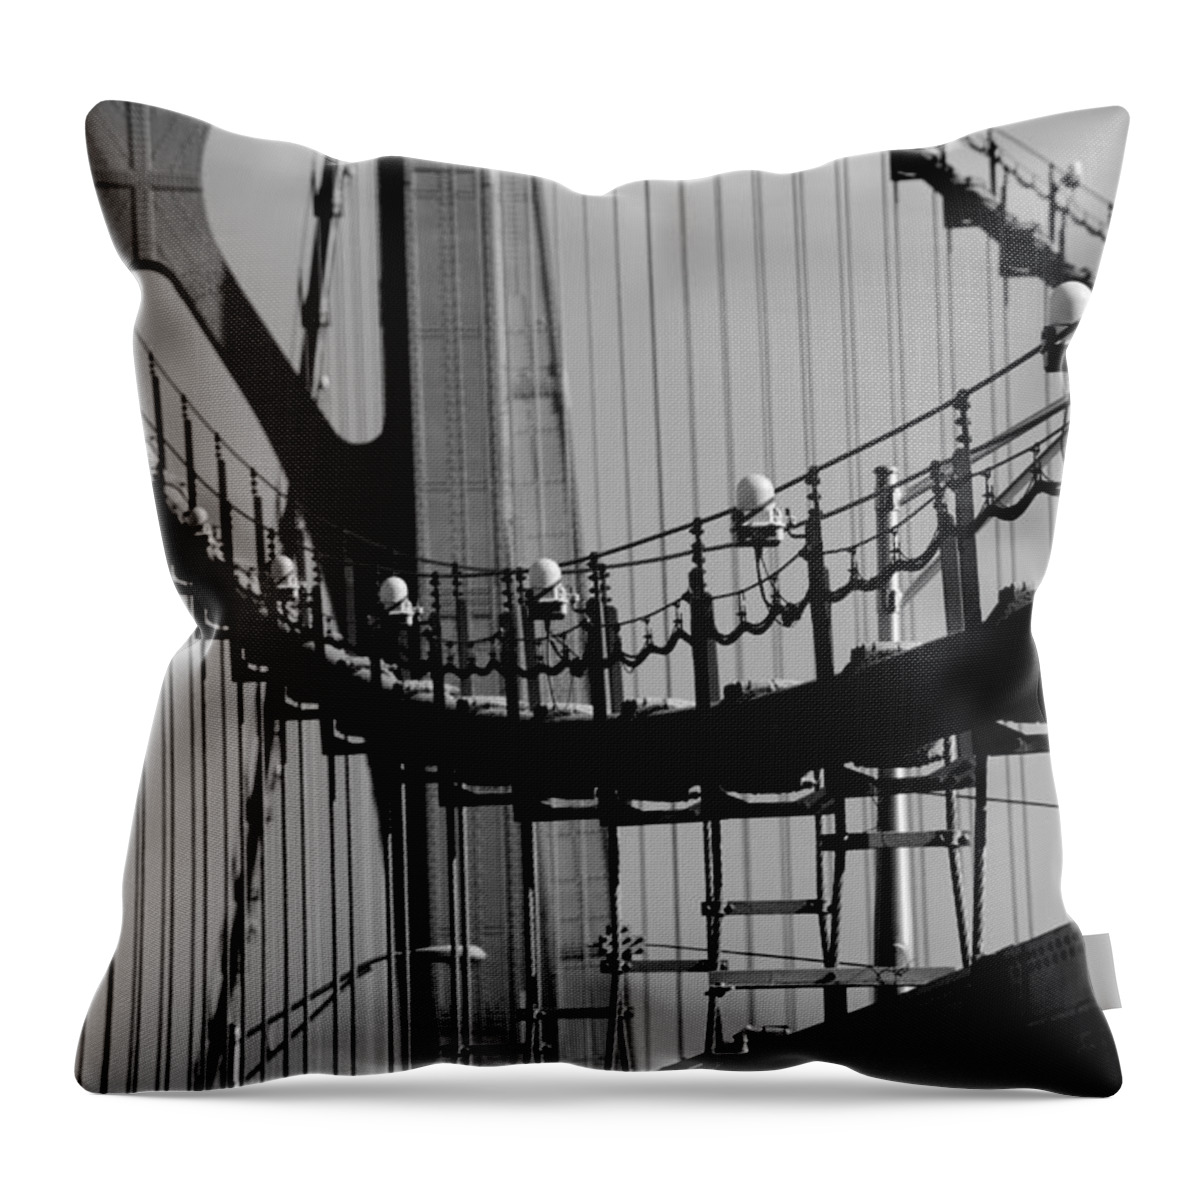 Bridges Throw Pillow featuring the photograph Cables by John Schneider